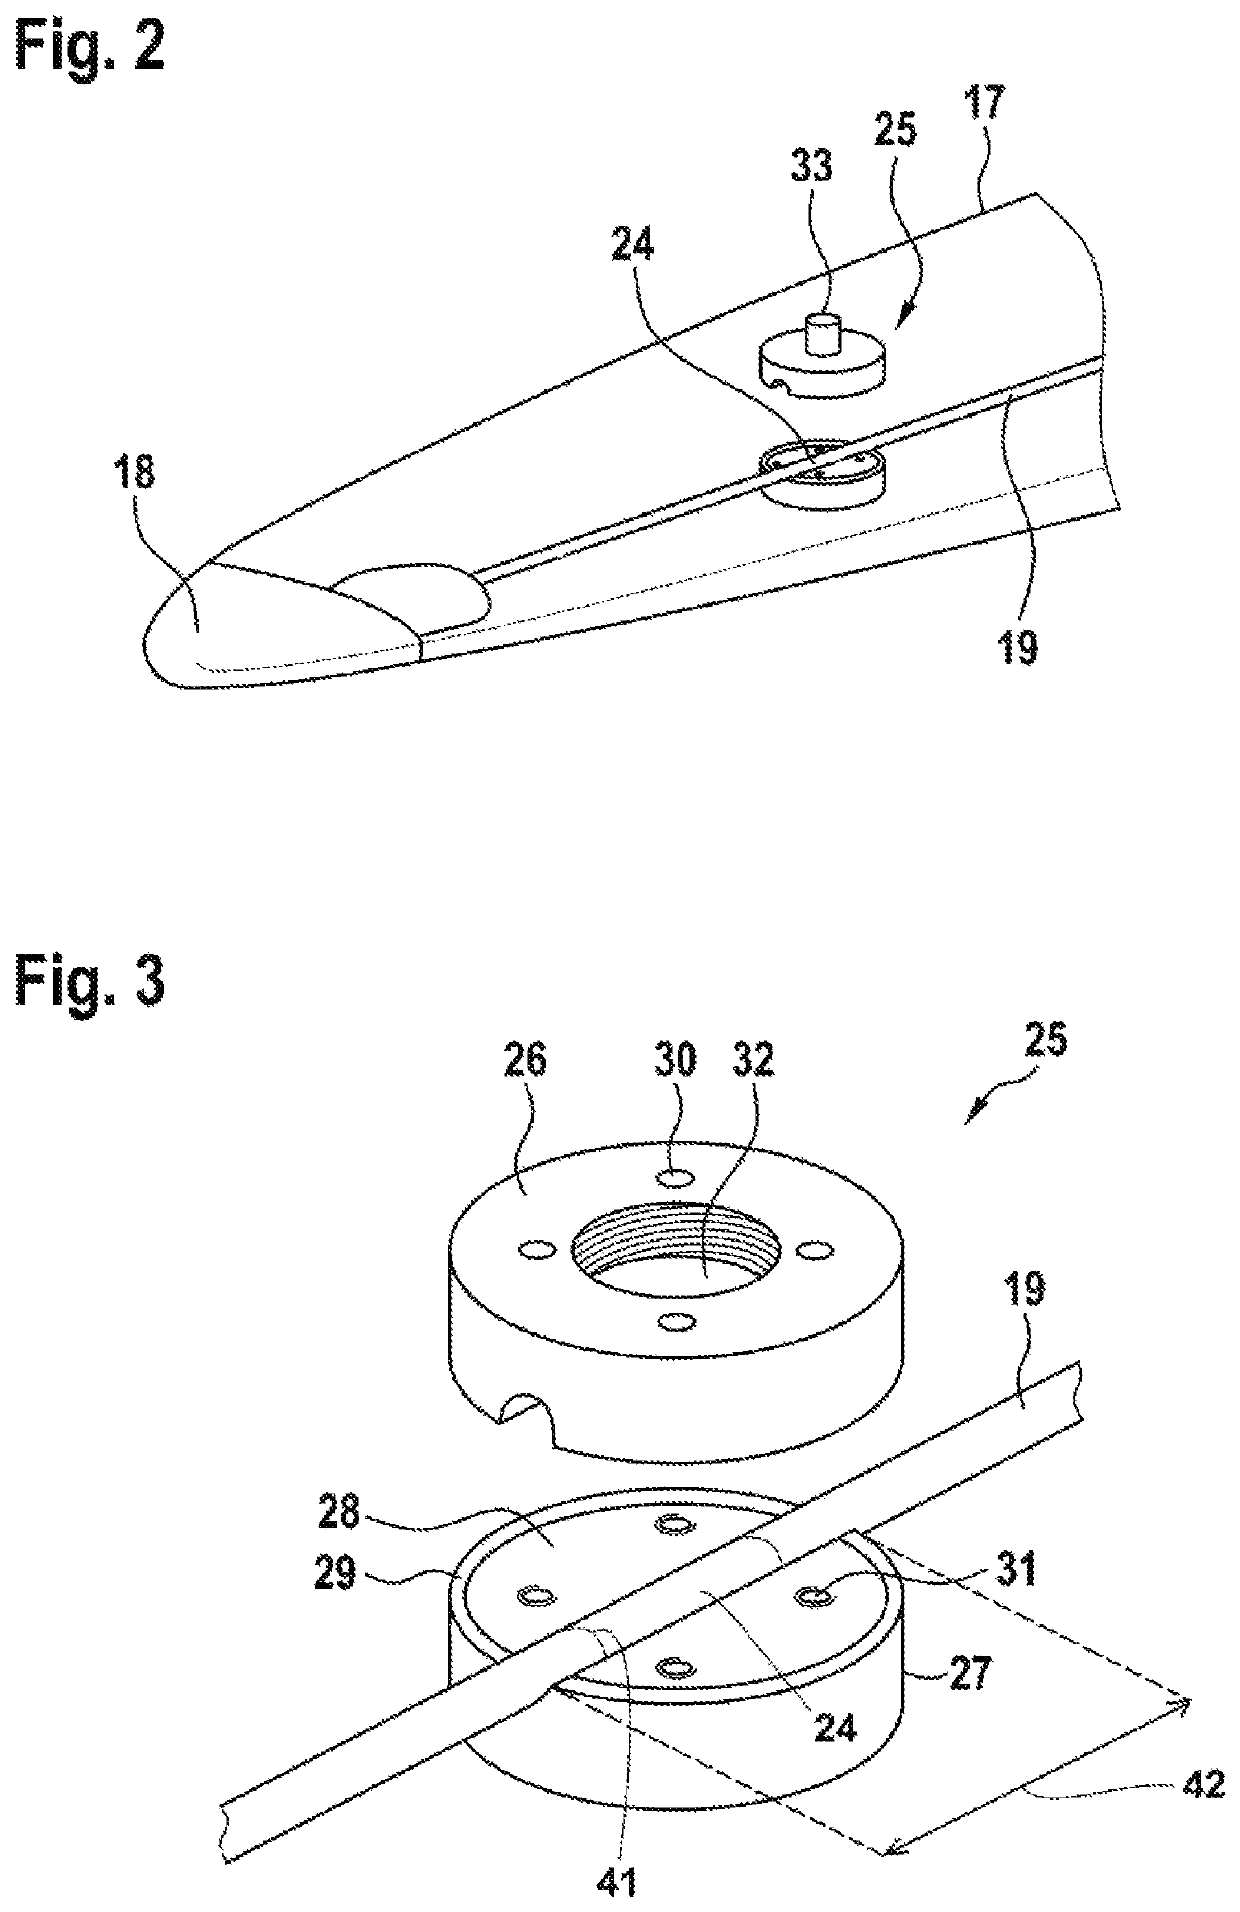 Rotor blade of a wind turbine and method for retrofitting a lightning protection device of a rotor blade